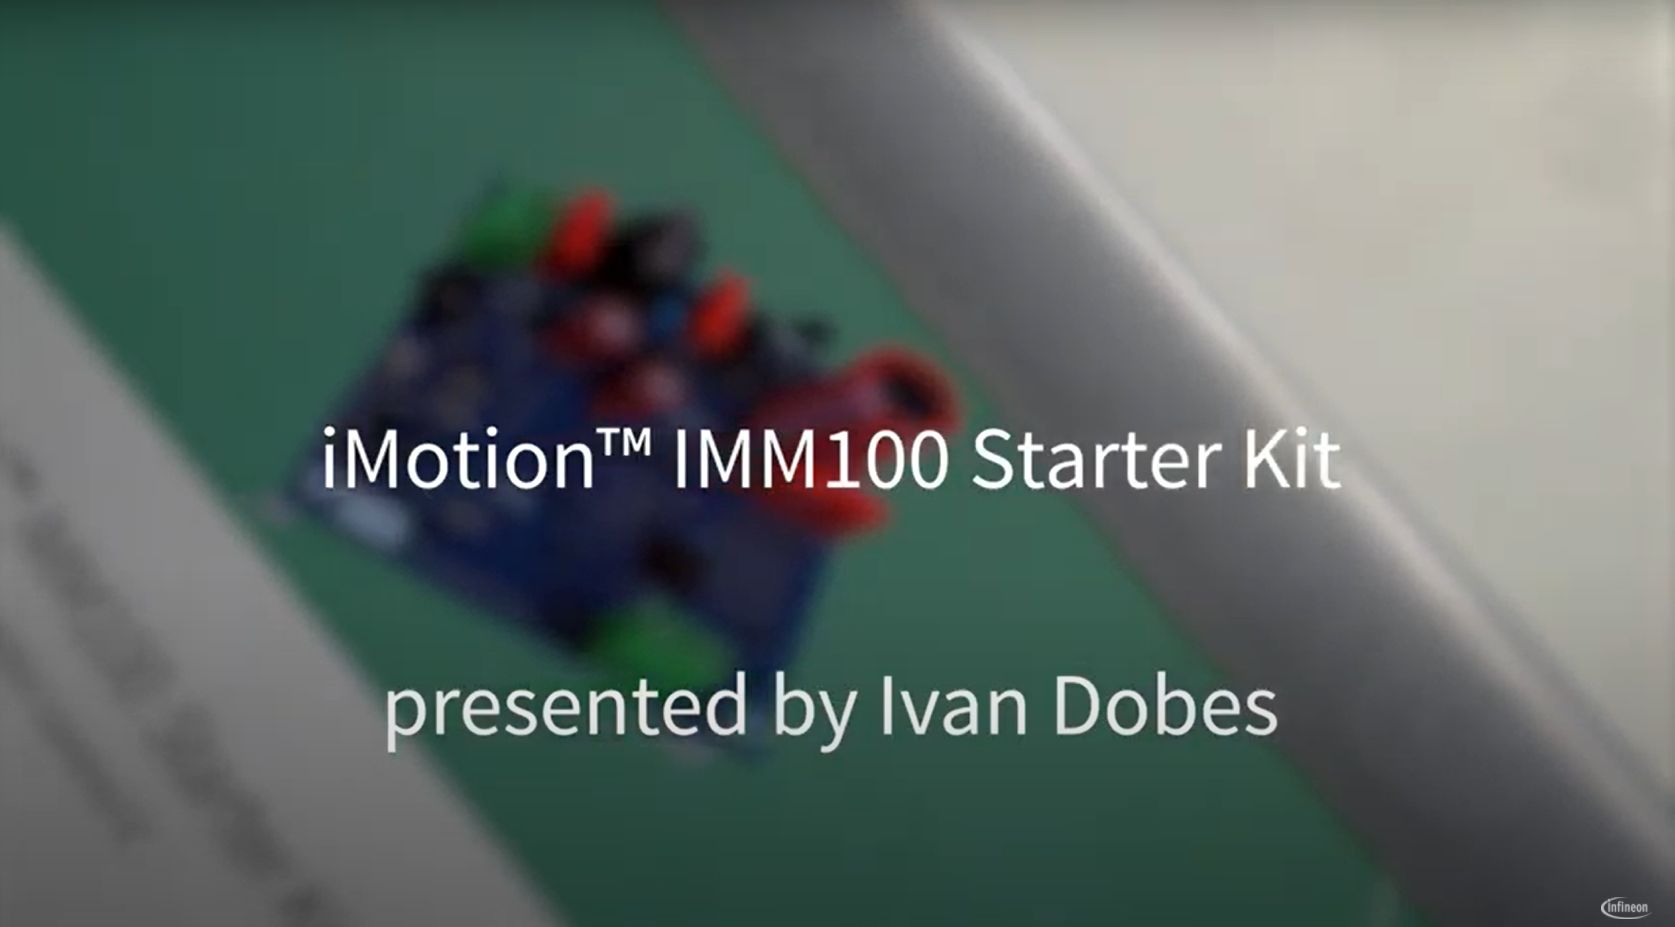 How to run a motor with the iMotion™ IMM100 Starter Kit (2019/12/07,英語ビデオ)